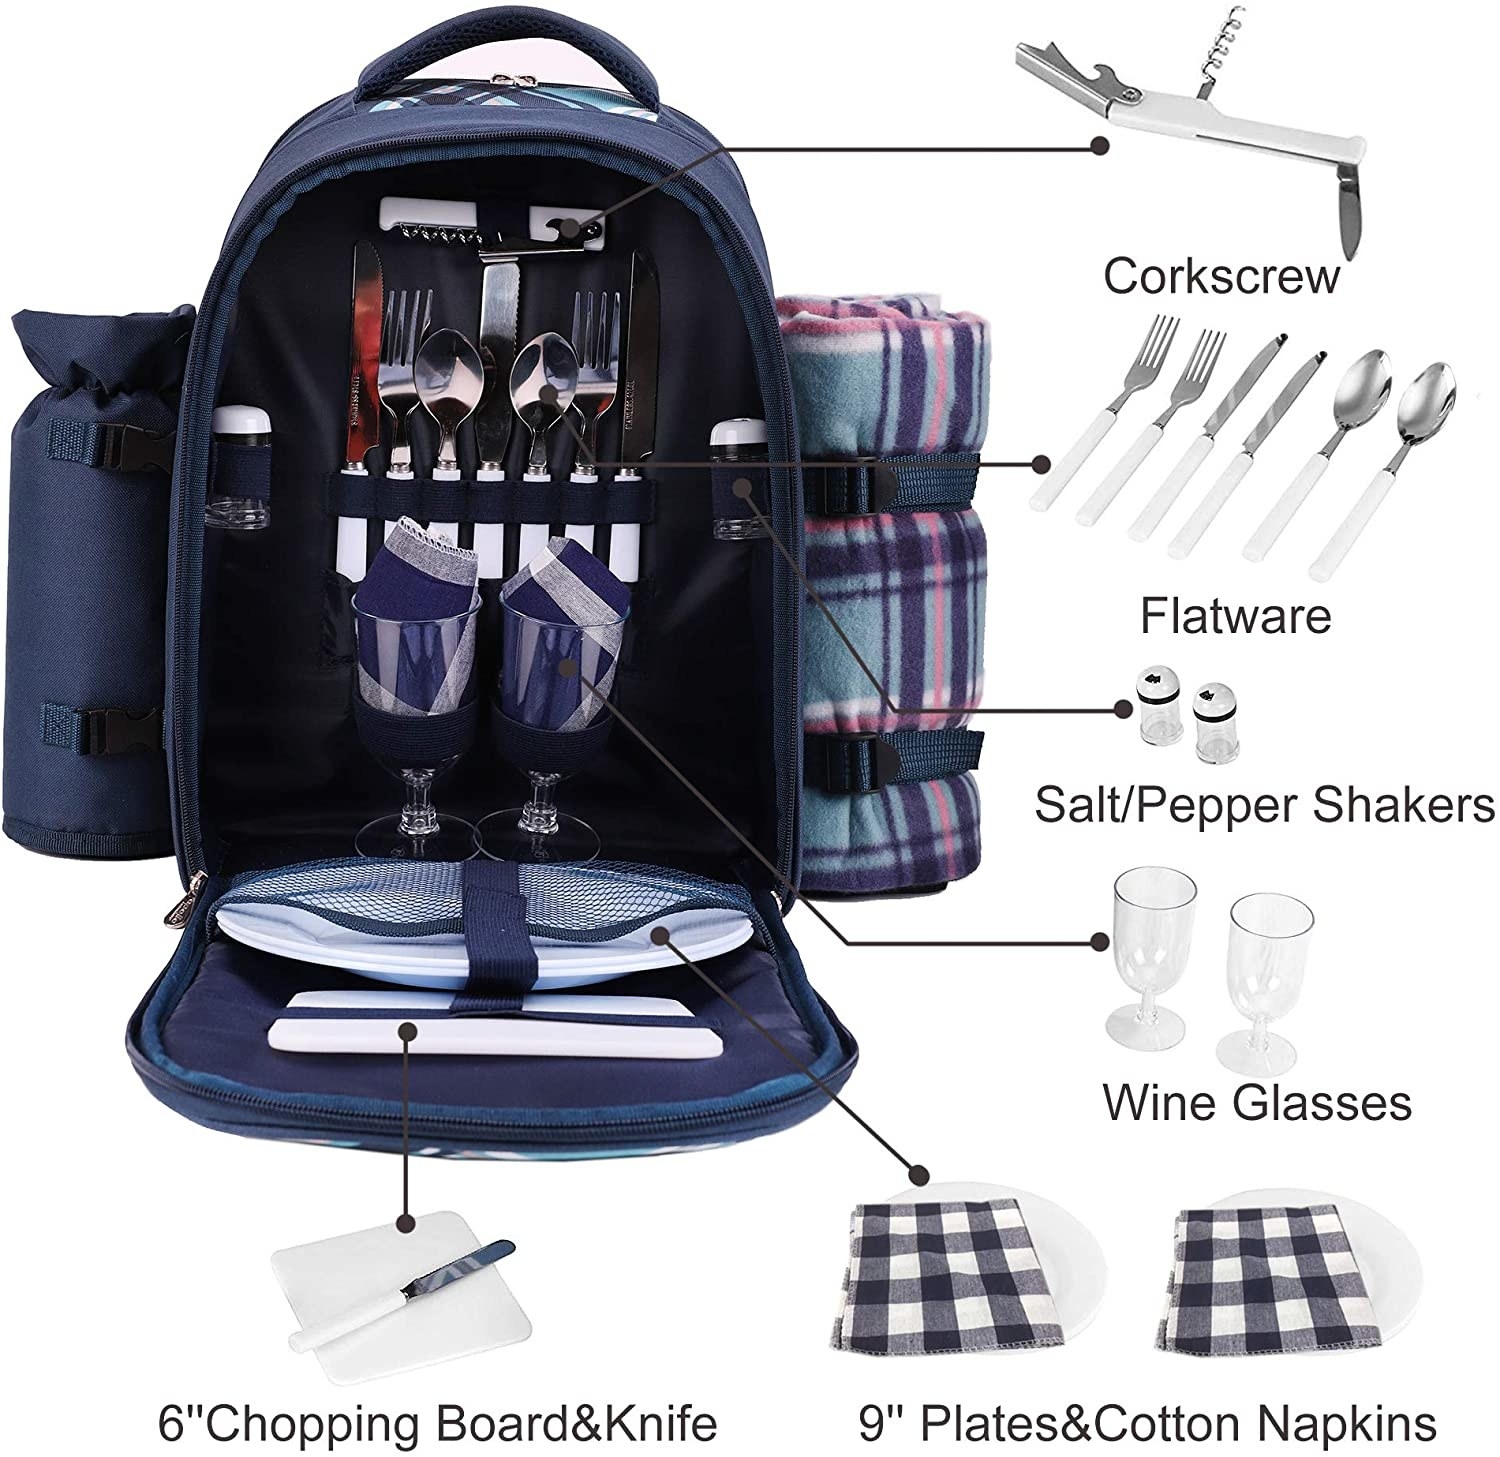 the open backpack with compartments for a variety of dining and eating items needed in a picnic